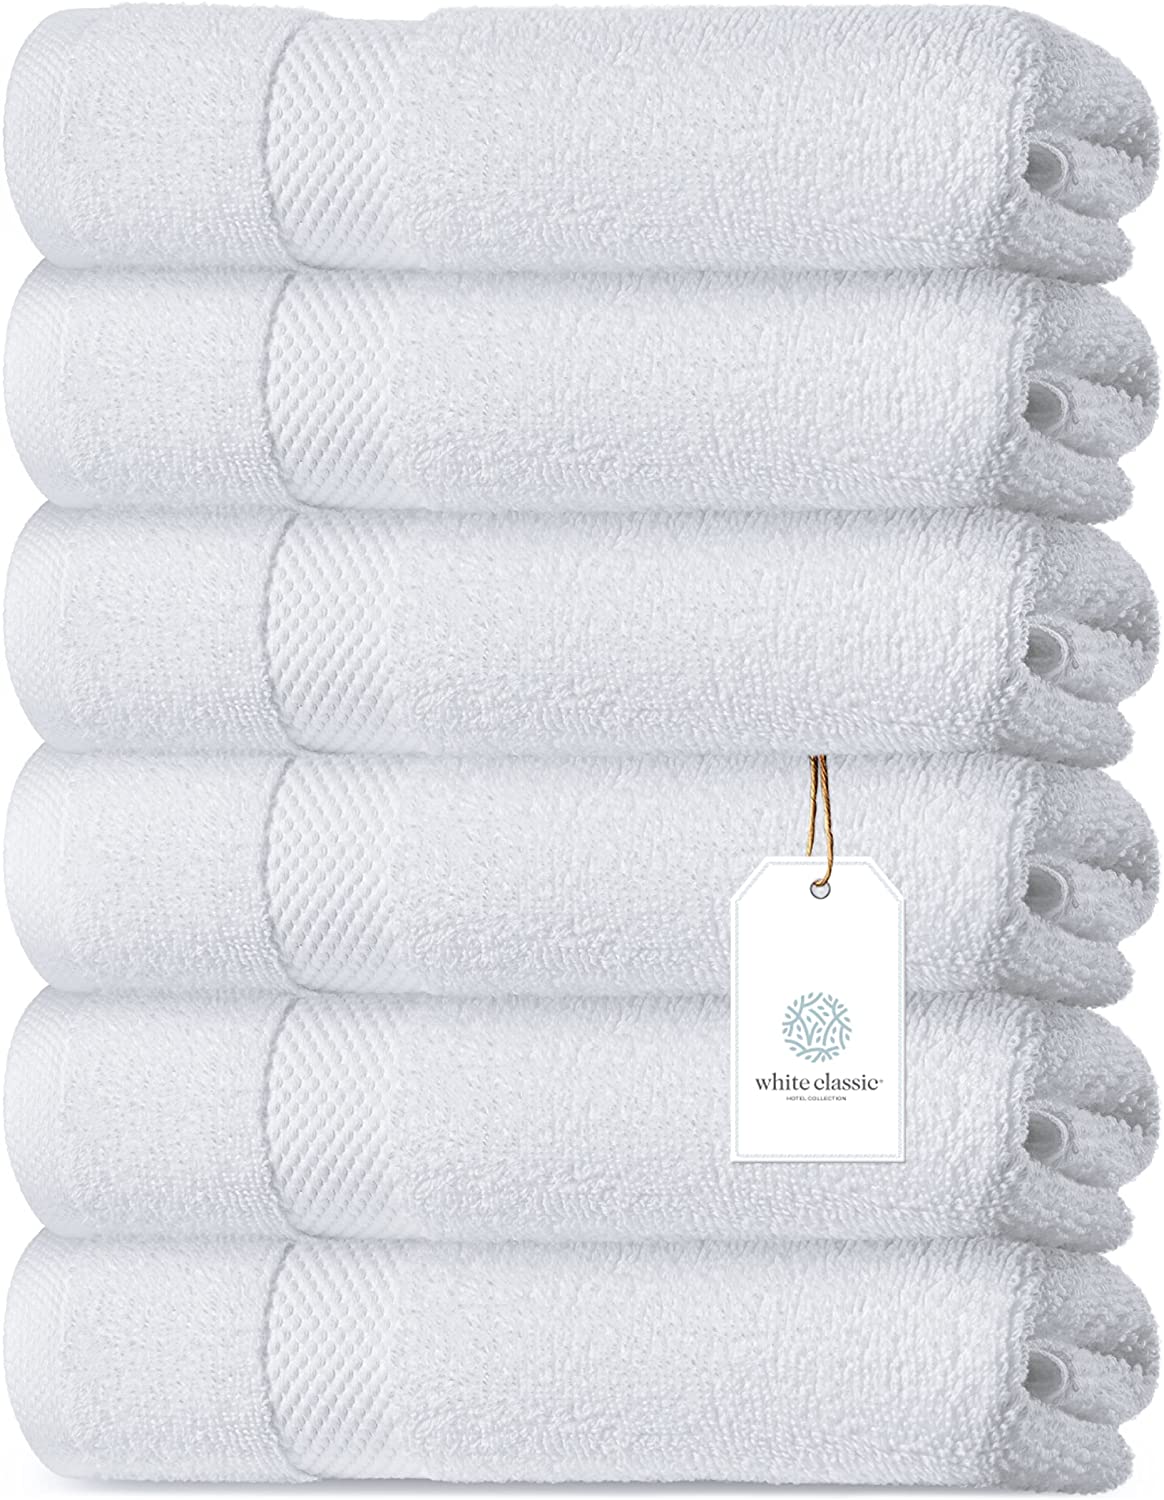 White Classic Quick Dry Long-Lasting Hand Towels, 6-Pack